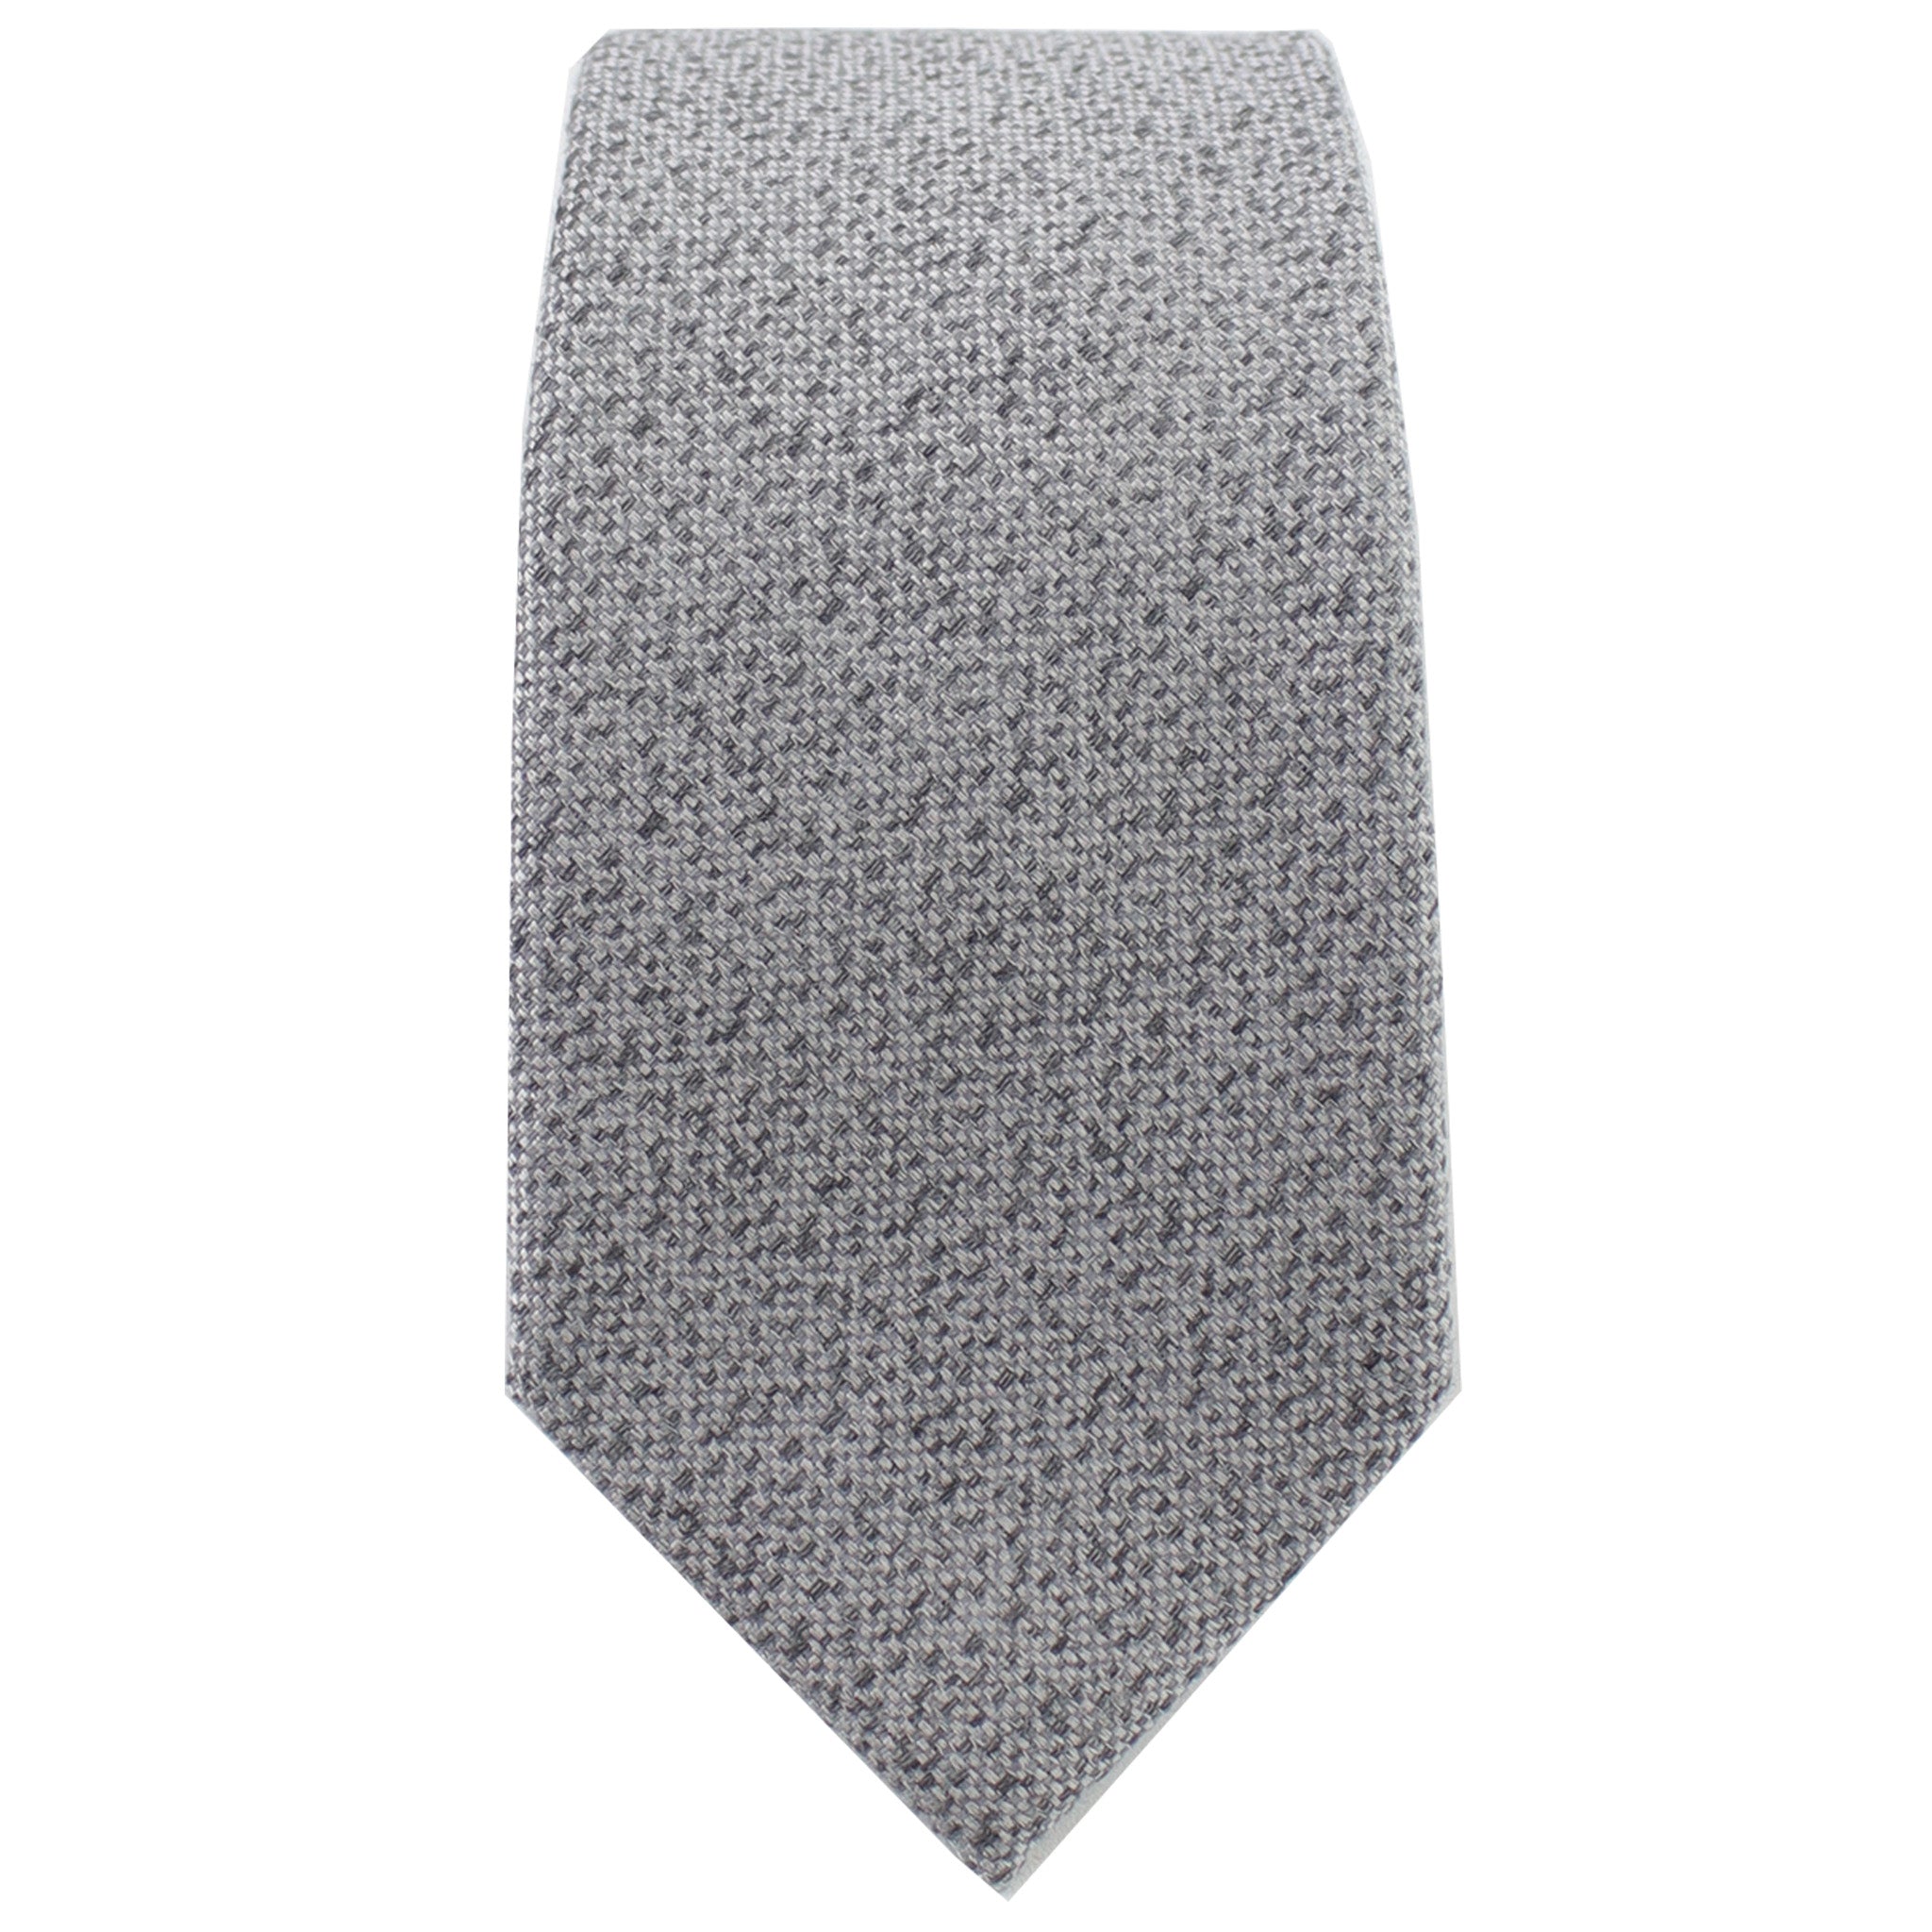 Silver & Charcoal Heather Tie from DIBI